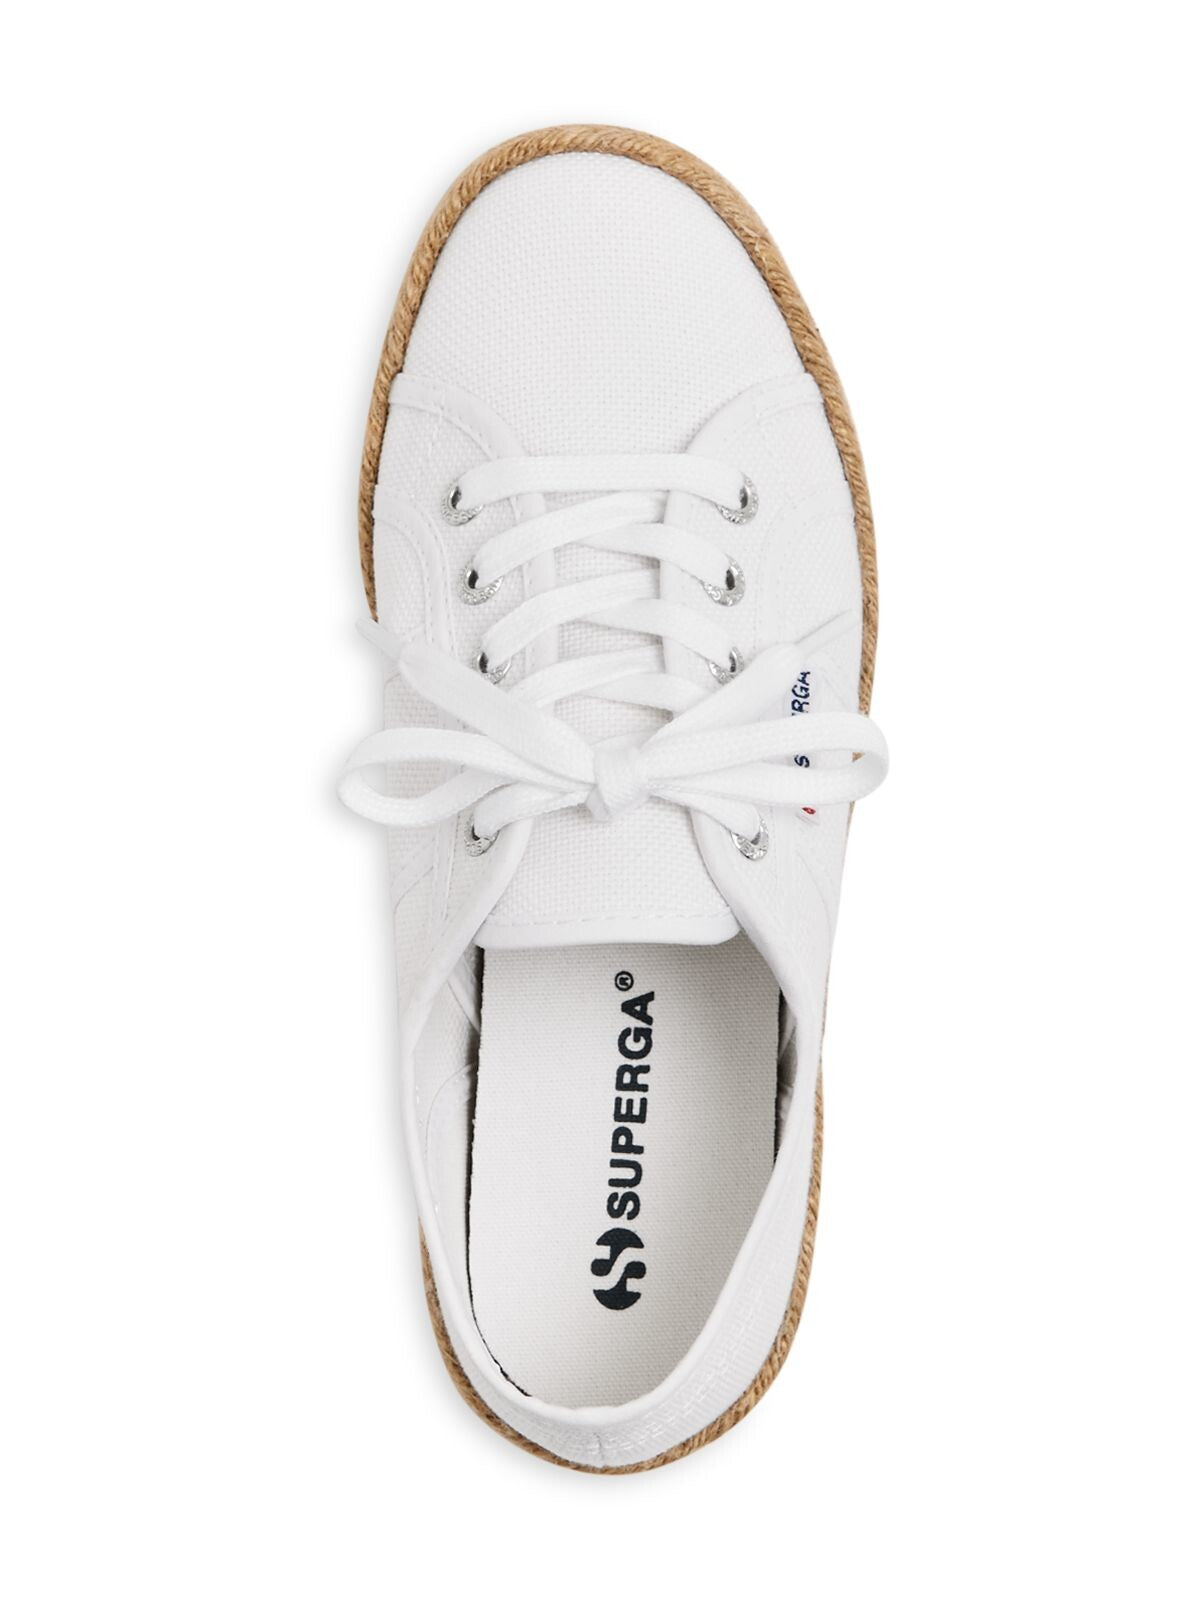 SUPERGA Womens White Woven Logo Round Toe Platform Lace-Up Athletic Sneakers 39